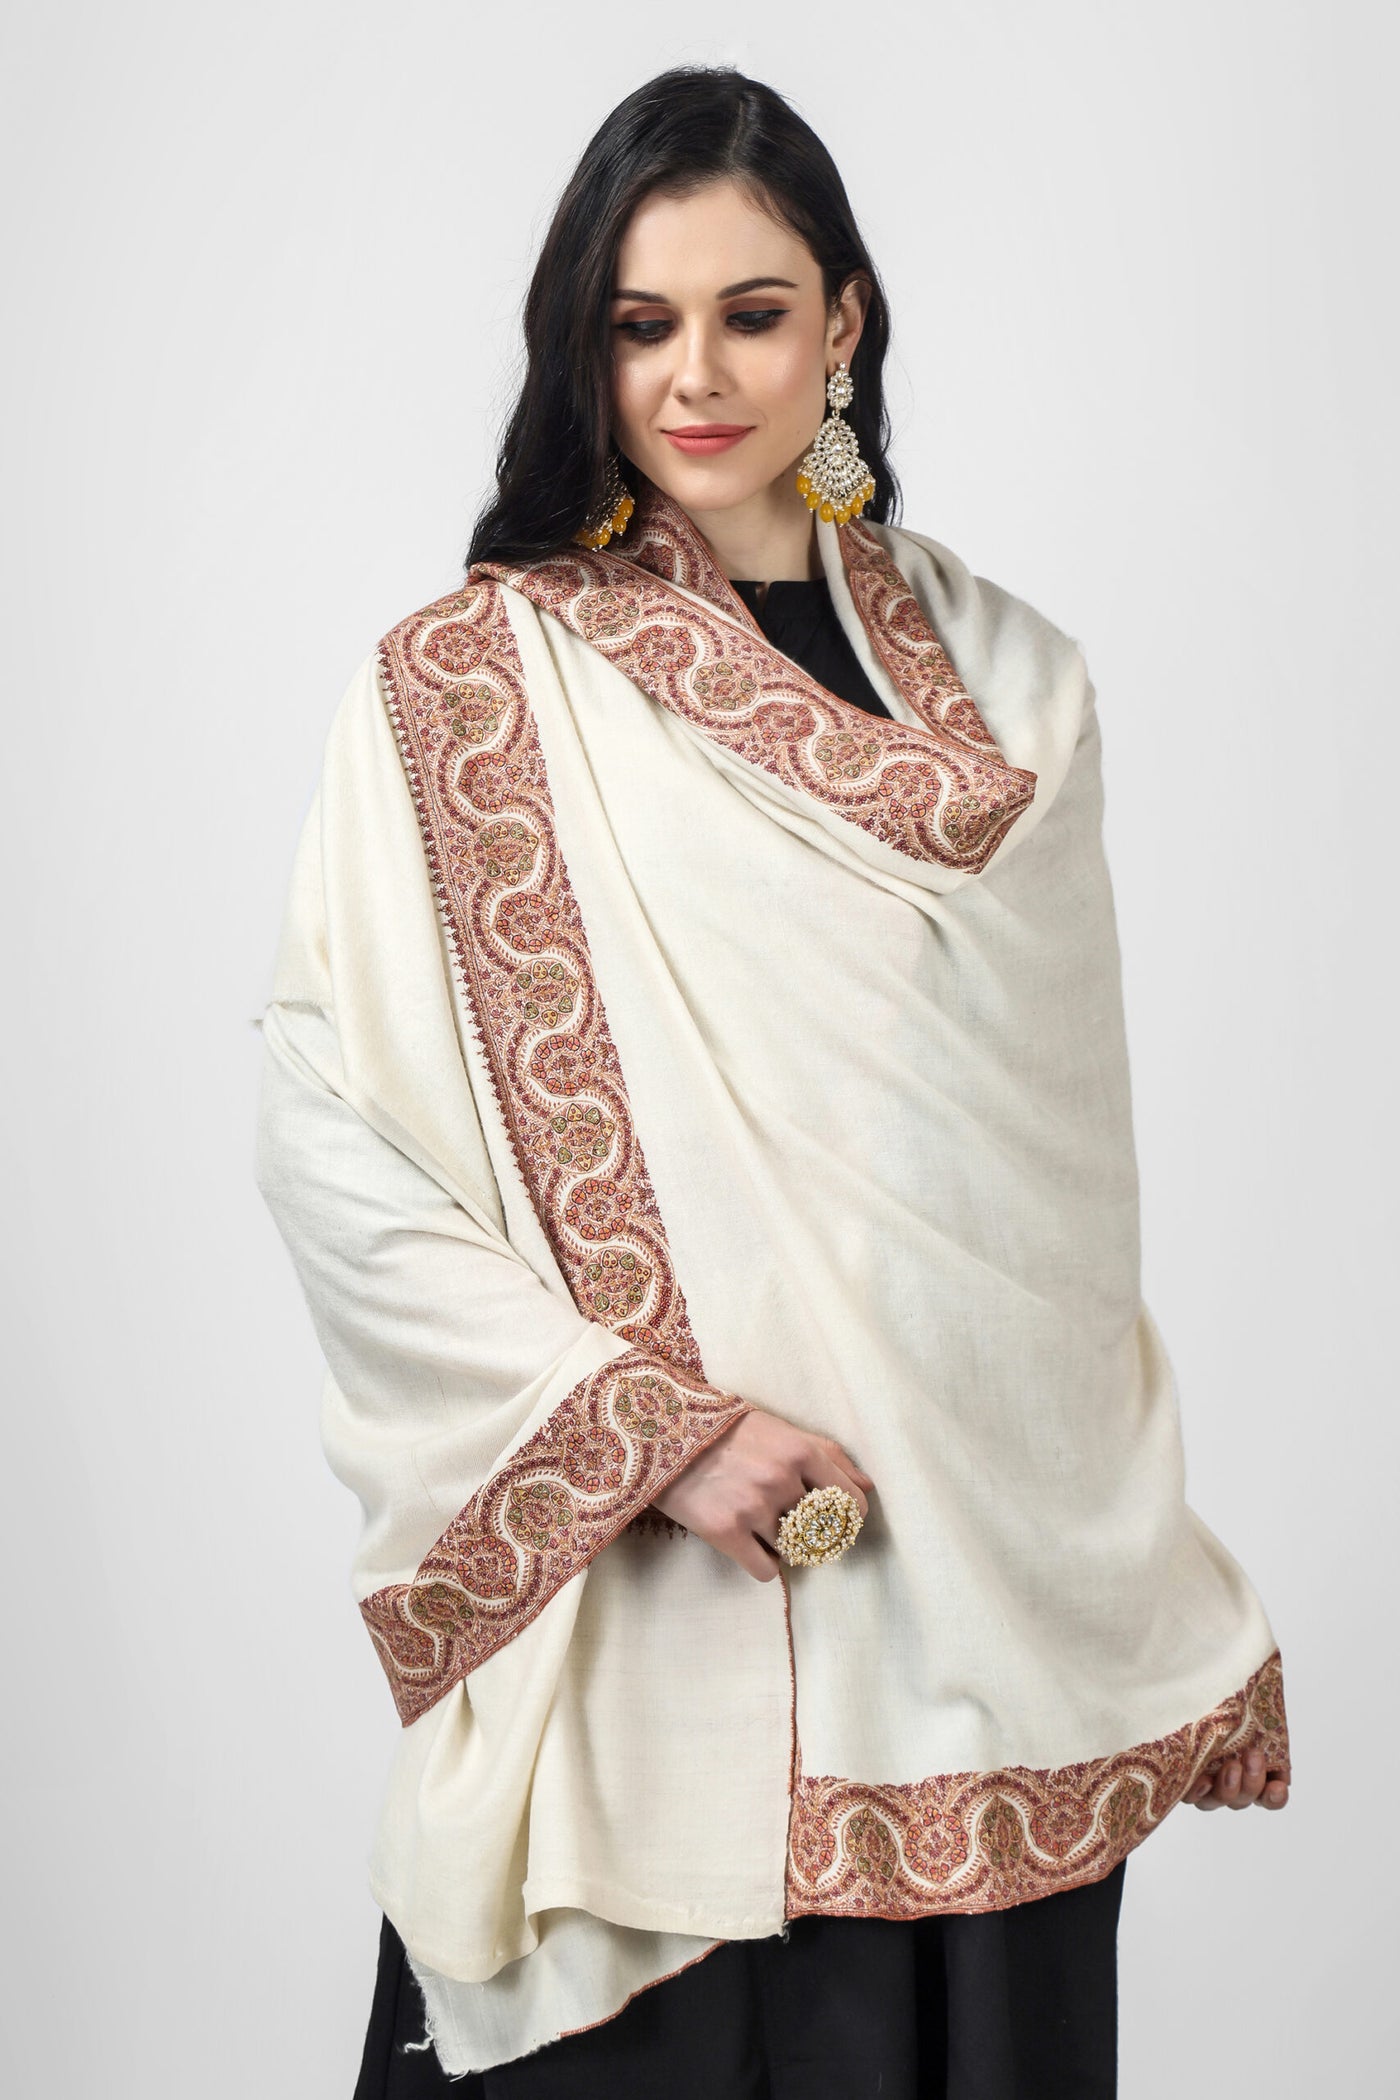  Indulge in opulence with this exquisite off-white handmade Kashmiri pashmina shawl, crafted from the finest pashmina wool, and adorned with an elegant mehraab embroidery design. This designer pashmina shawl is the epitome of luxury, making it the perfect accessory for any occasion, be it a party or a night out.